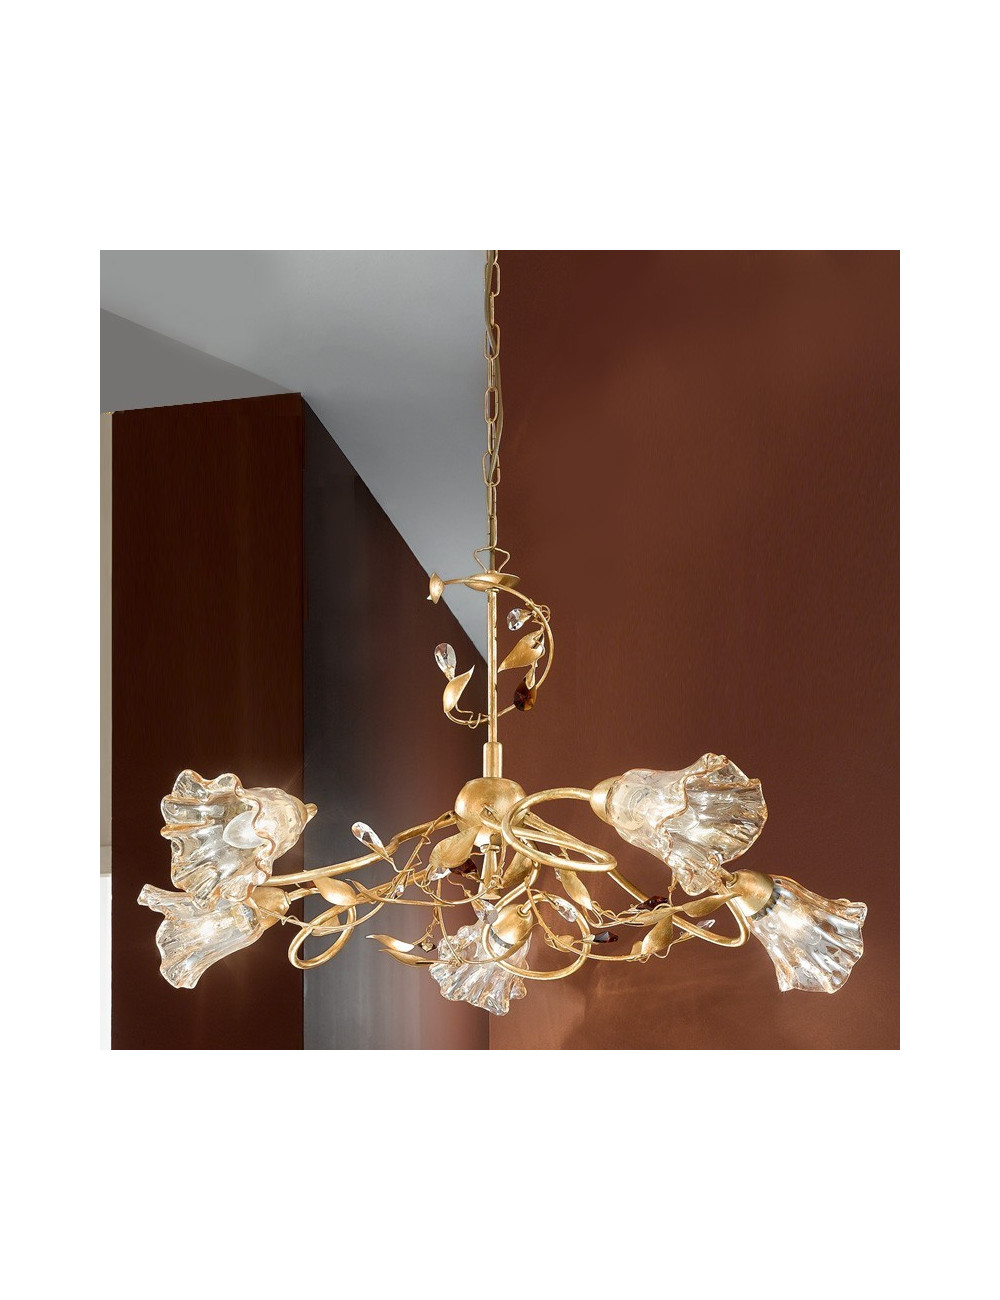 EMMA Chandelier 5 Lights Classic Style Rustic